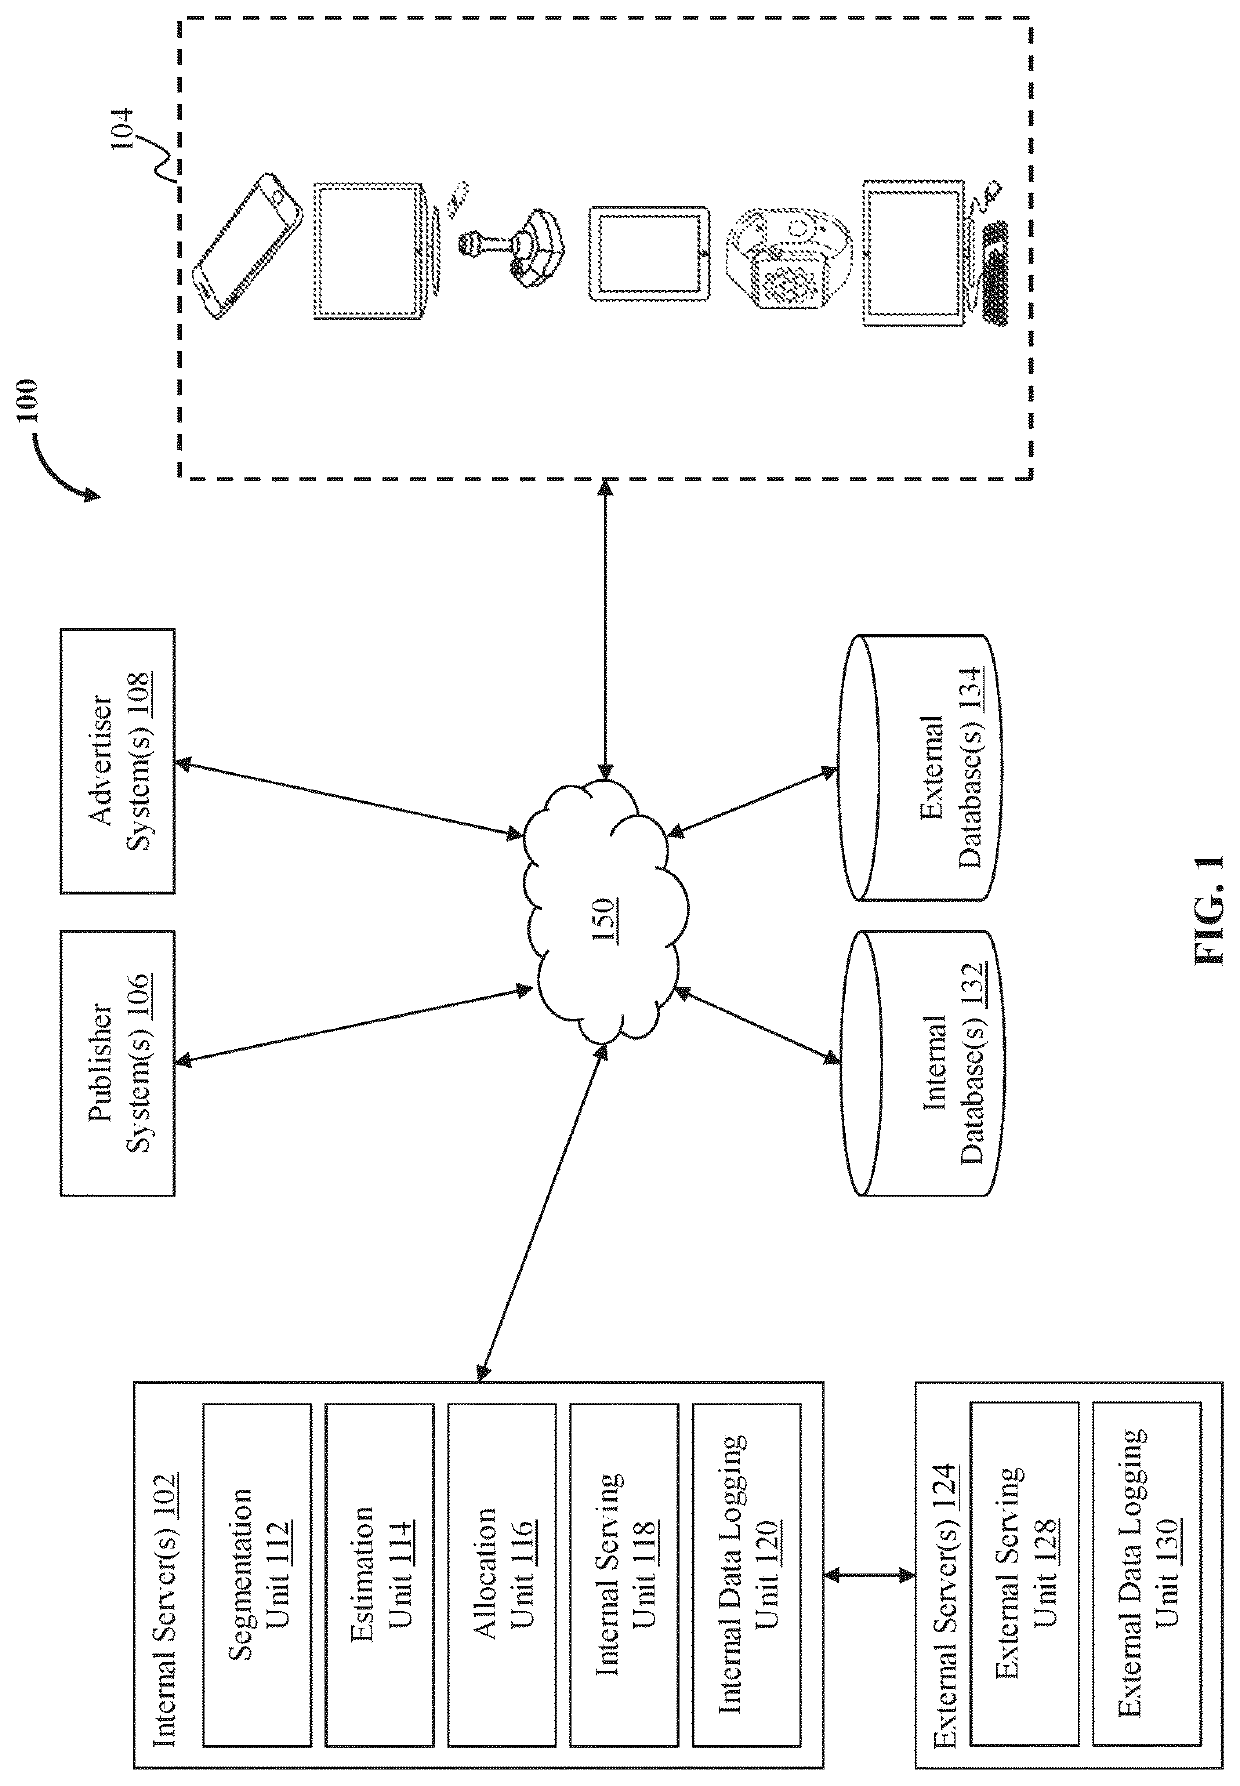 Method and system for persistent account generation and profiling